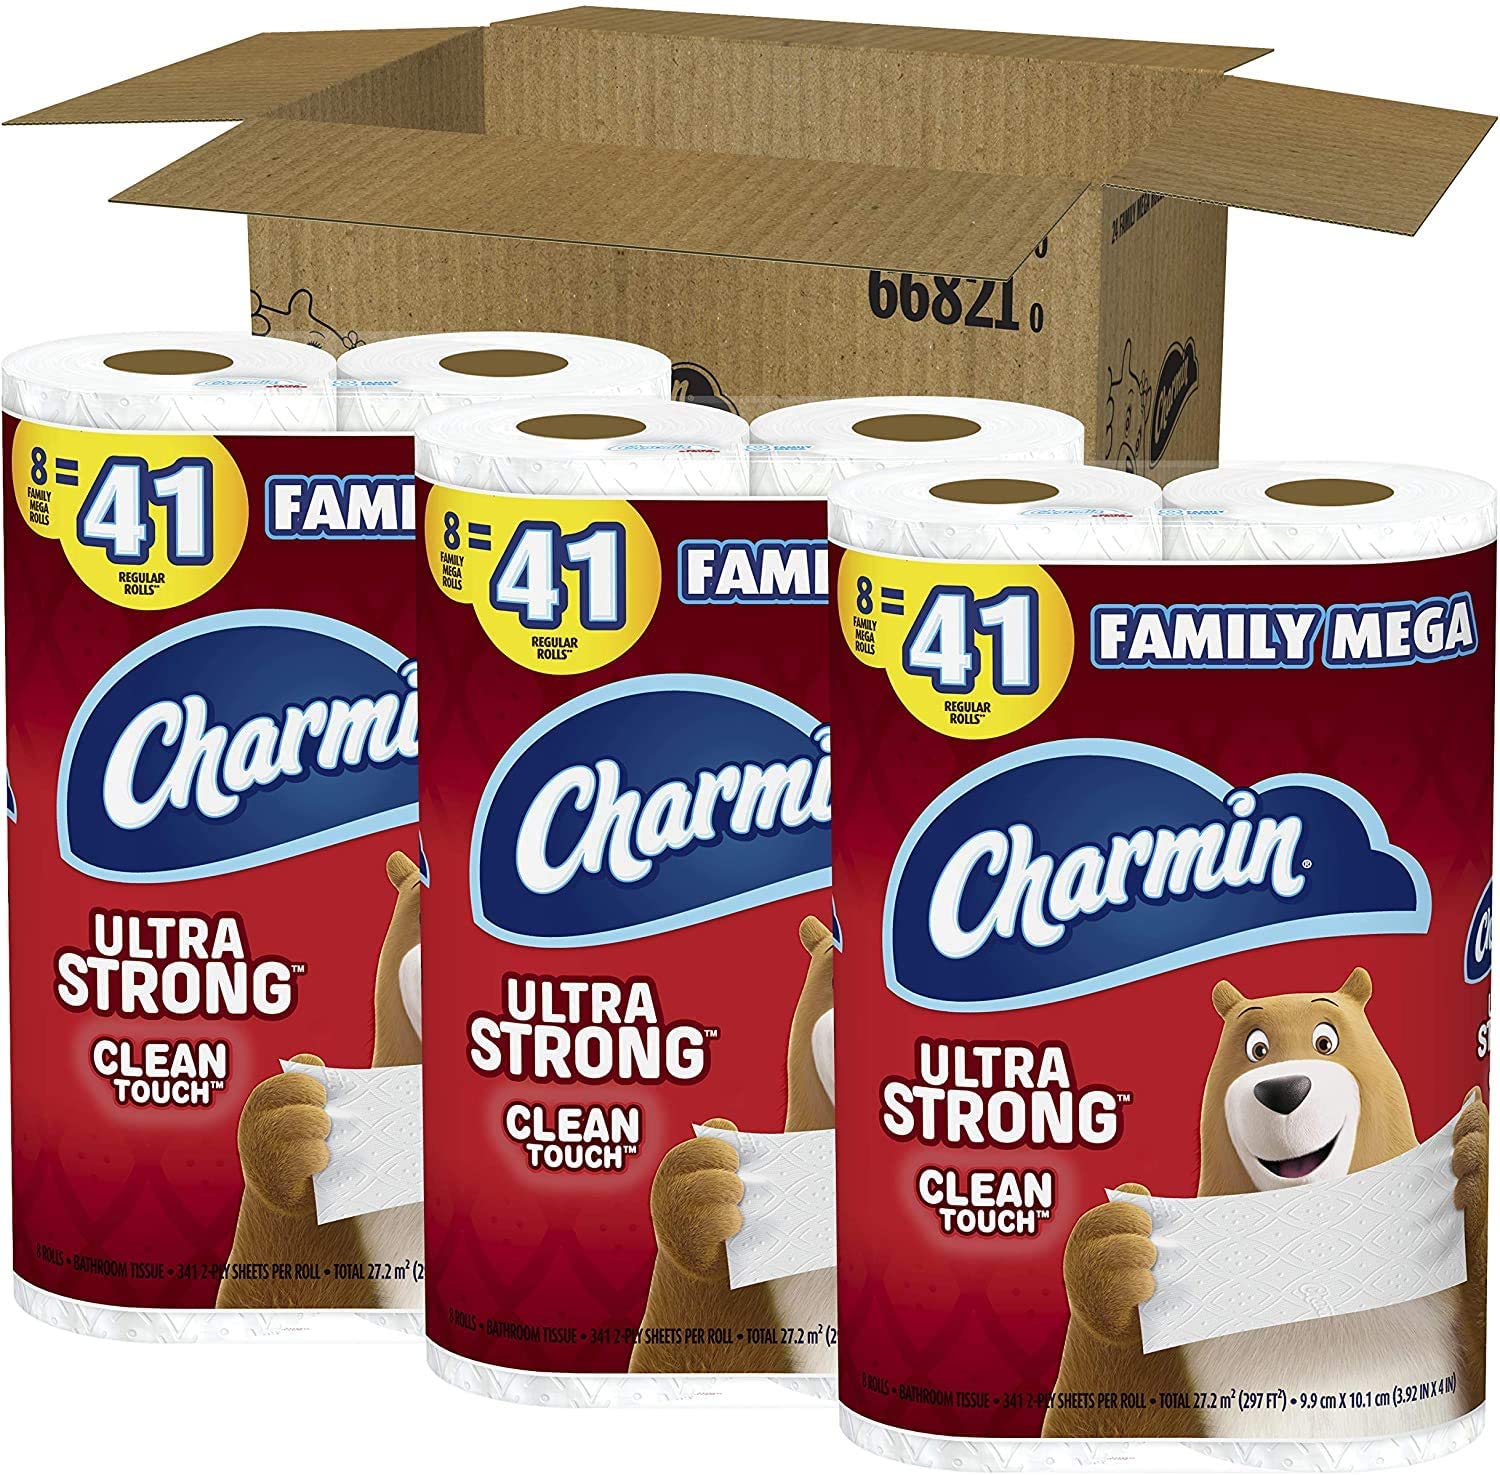 *Back* 24-Ct Charmin Family Mega Toilet Paper Rolls: Ultra Strong 2 for $40.32, Ultra Soft 2 for $38.44 + Free Shipping